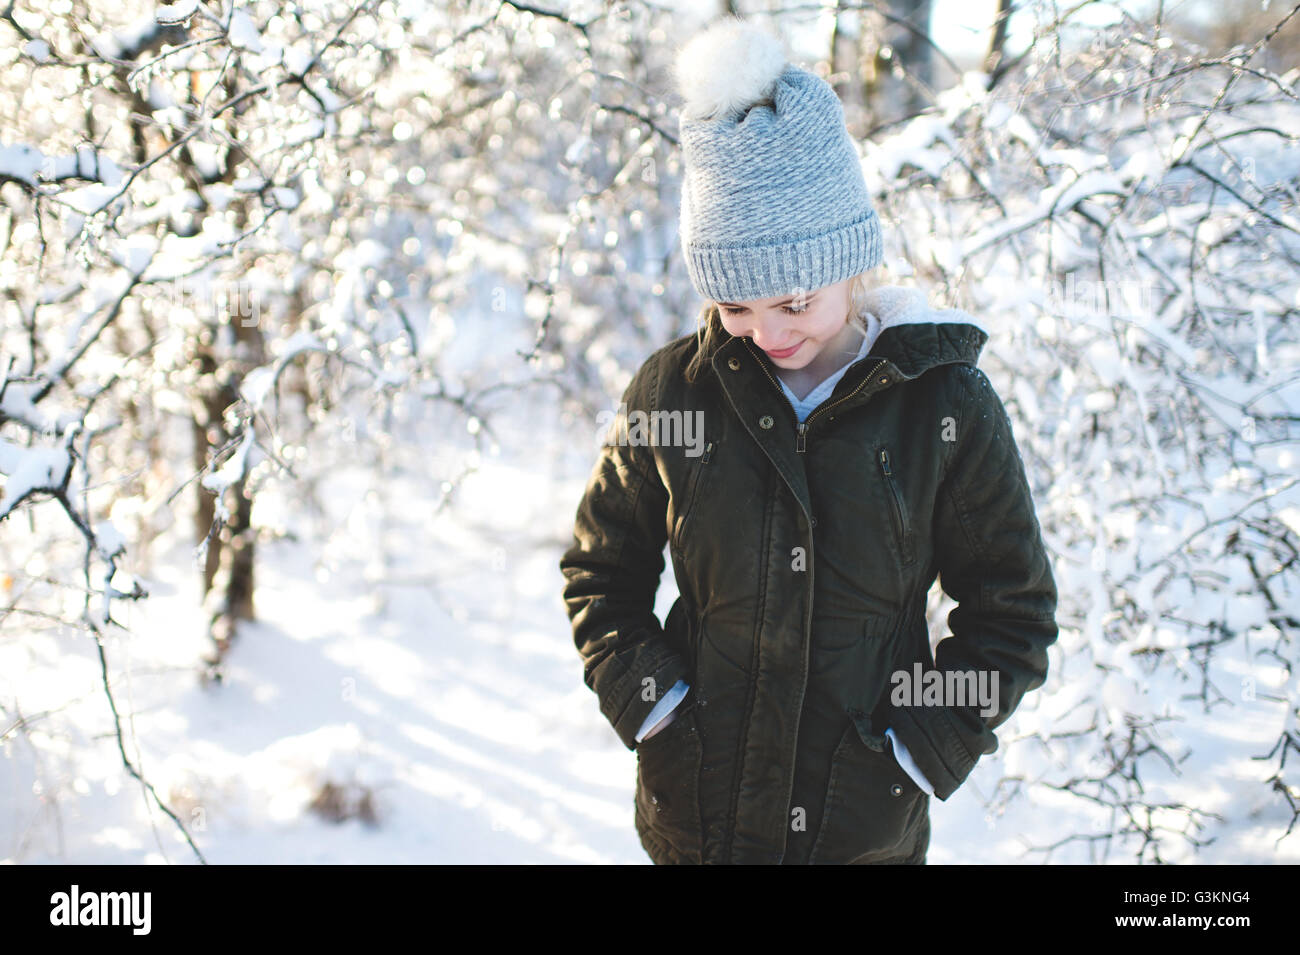 Young girl in snowy landscape, hands in pockets, looking down Stock Photo